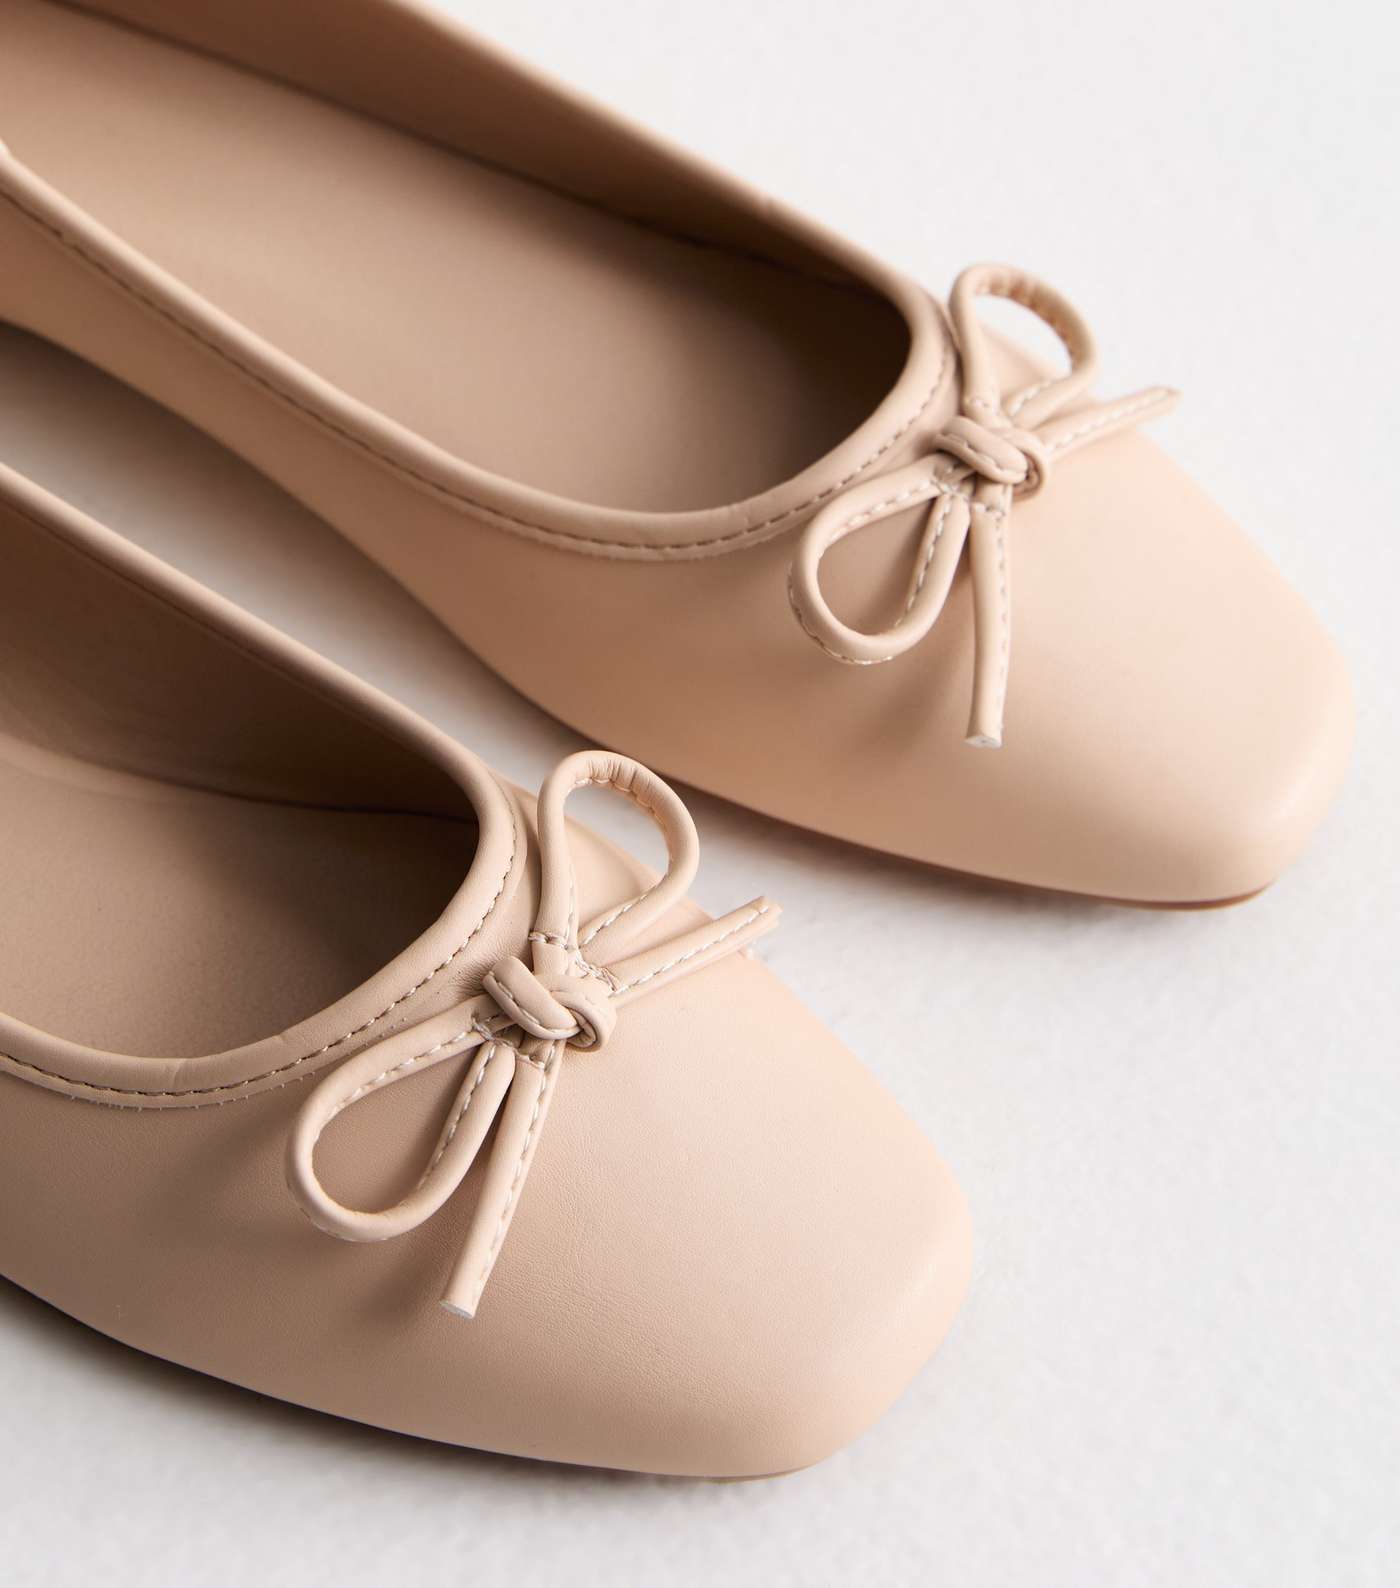 Truffle Pale Pink Leather-Look Bow Ballerina Pumps Image 3